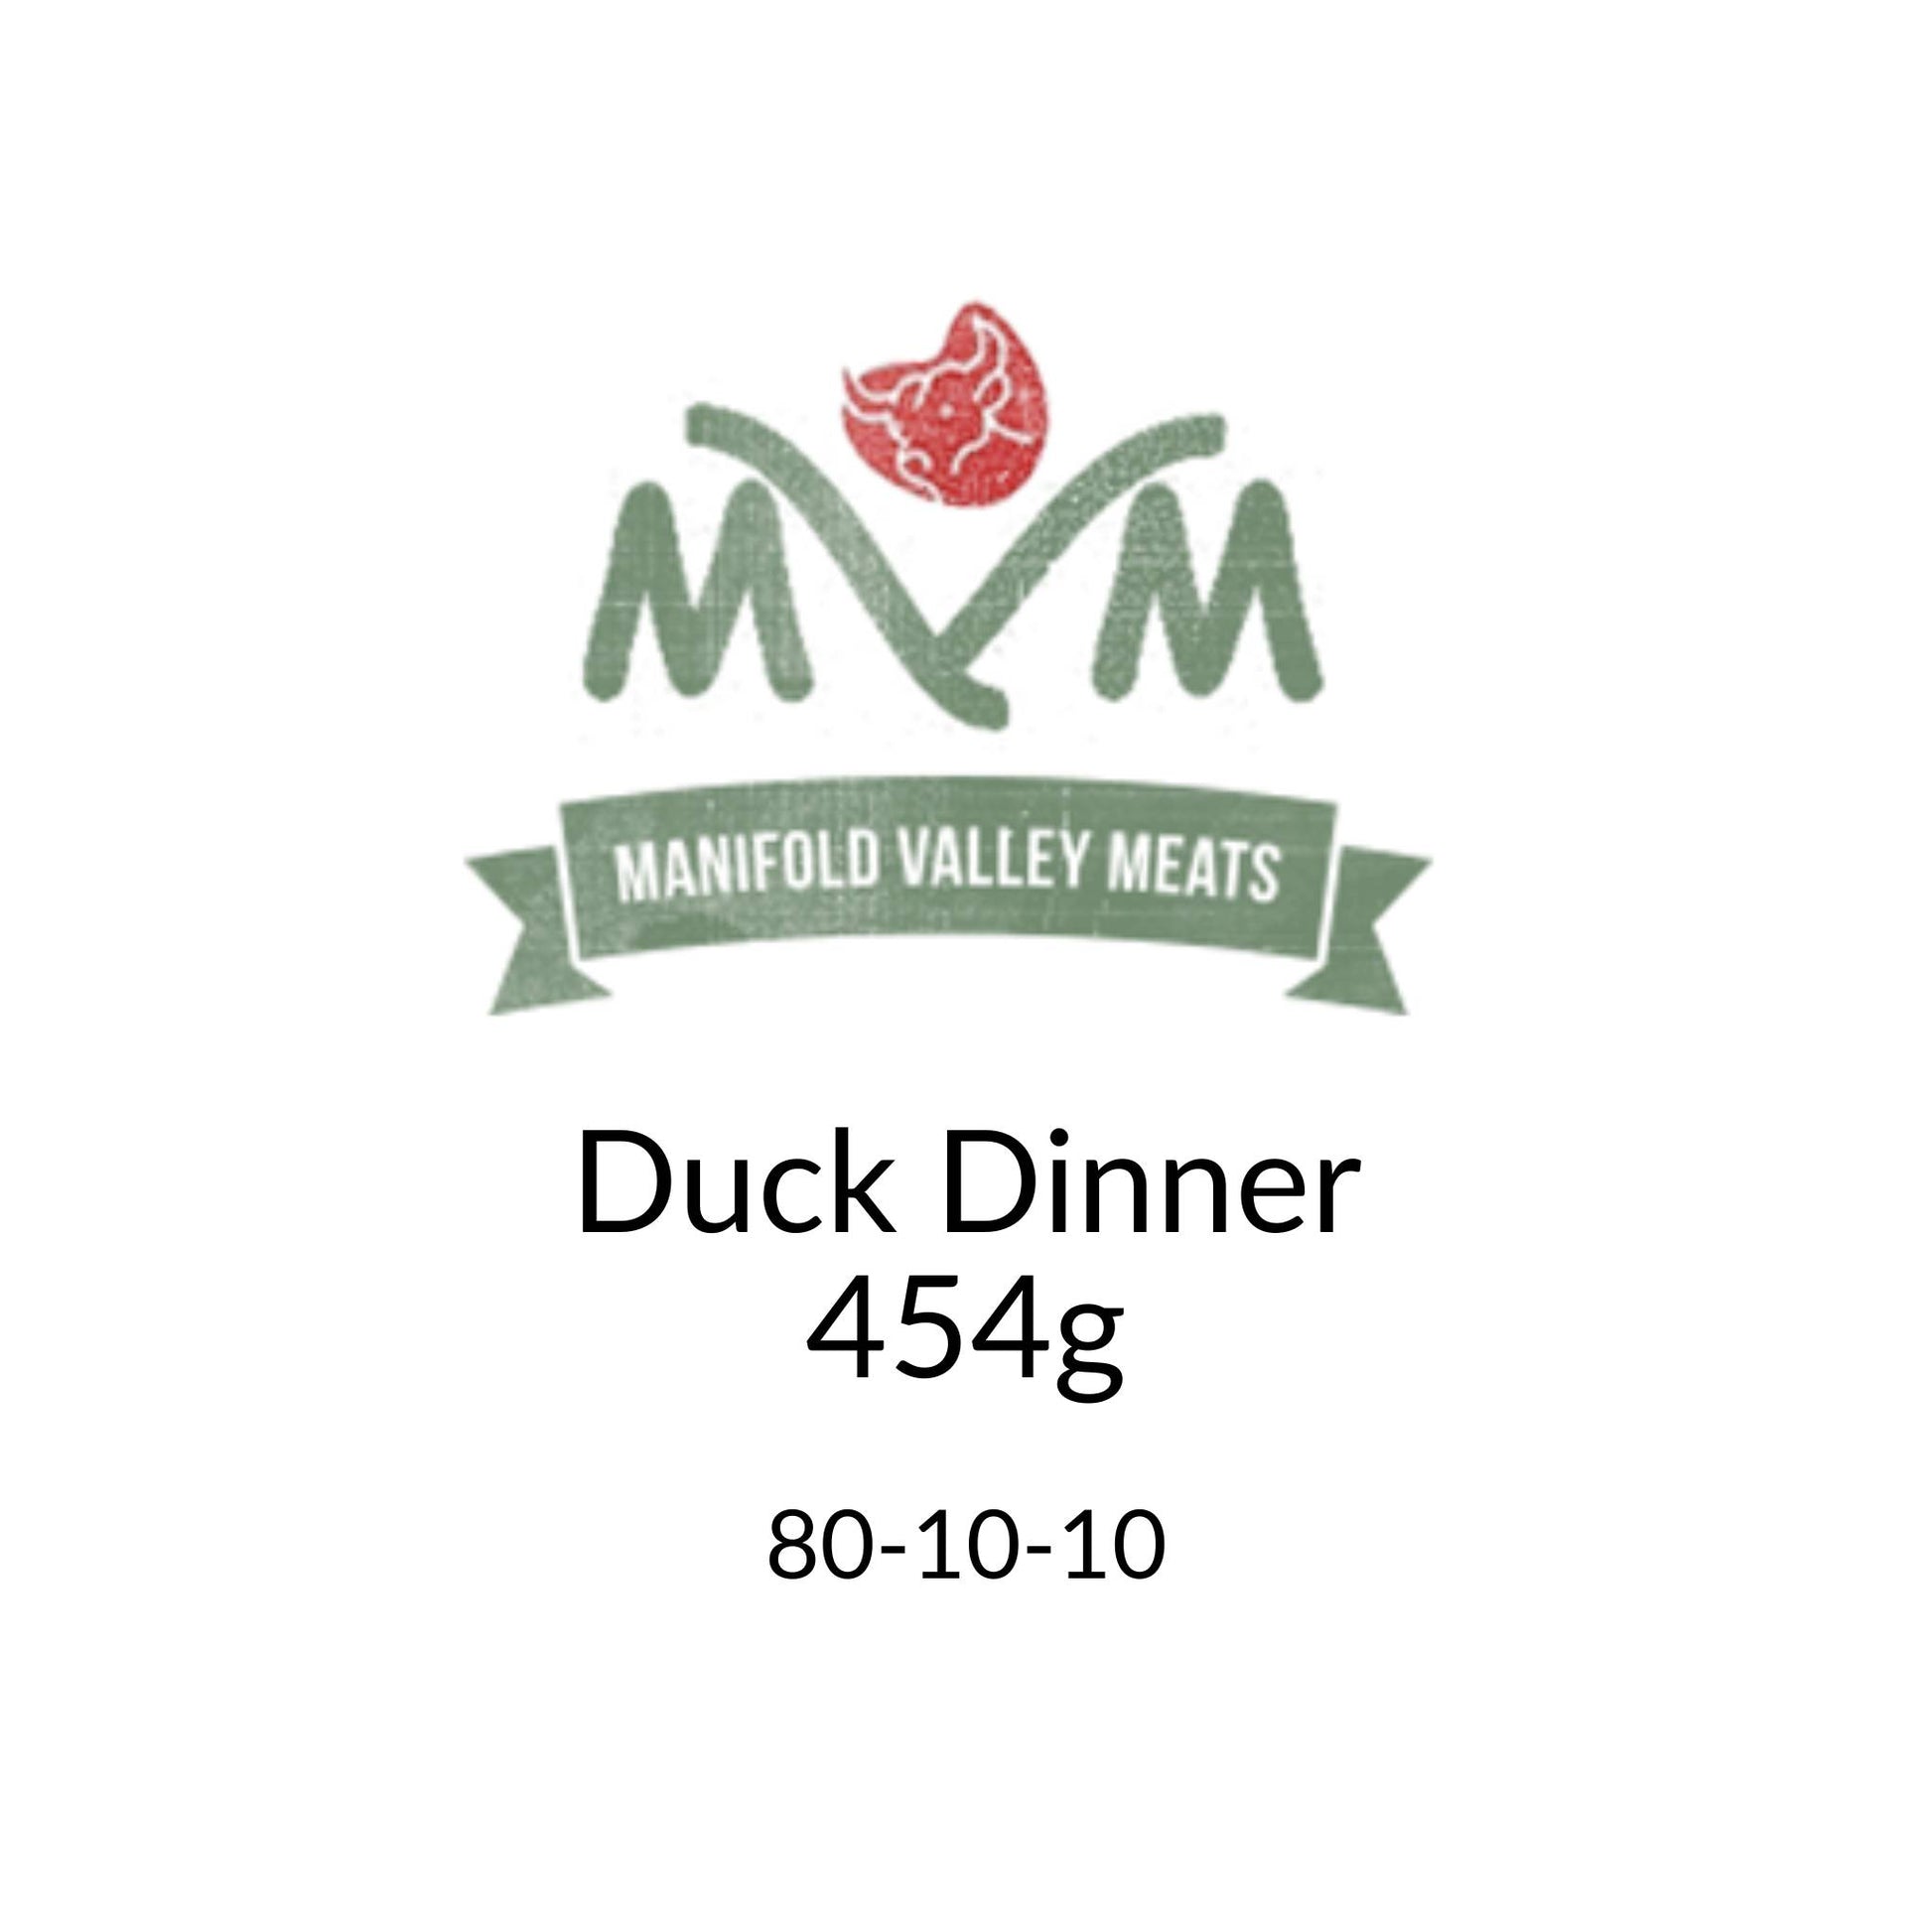 Manifold Valley Meats Duck Dinner Raw Dog Food